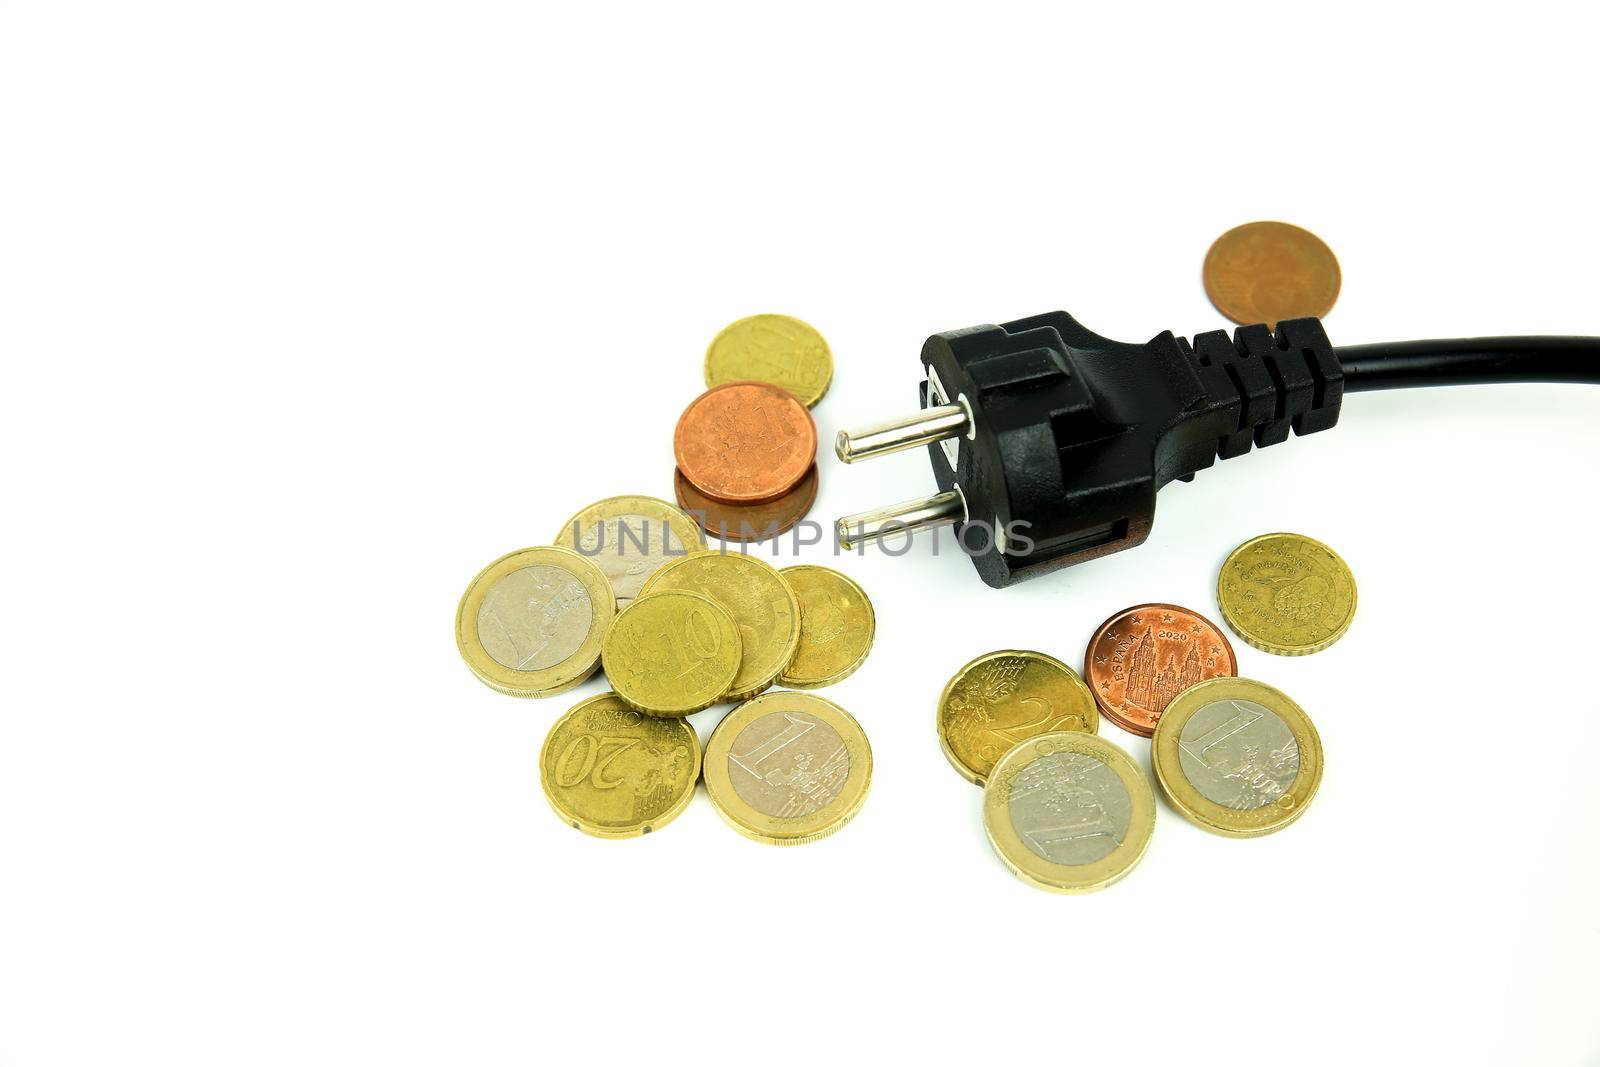 Black pin power plug and coins on white background